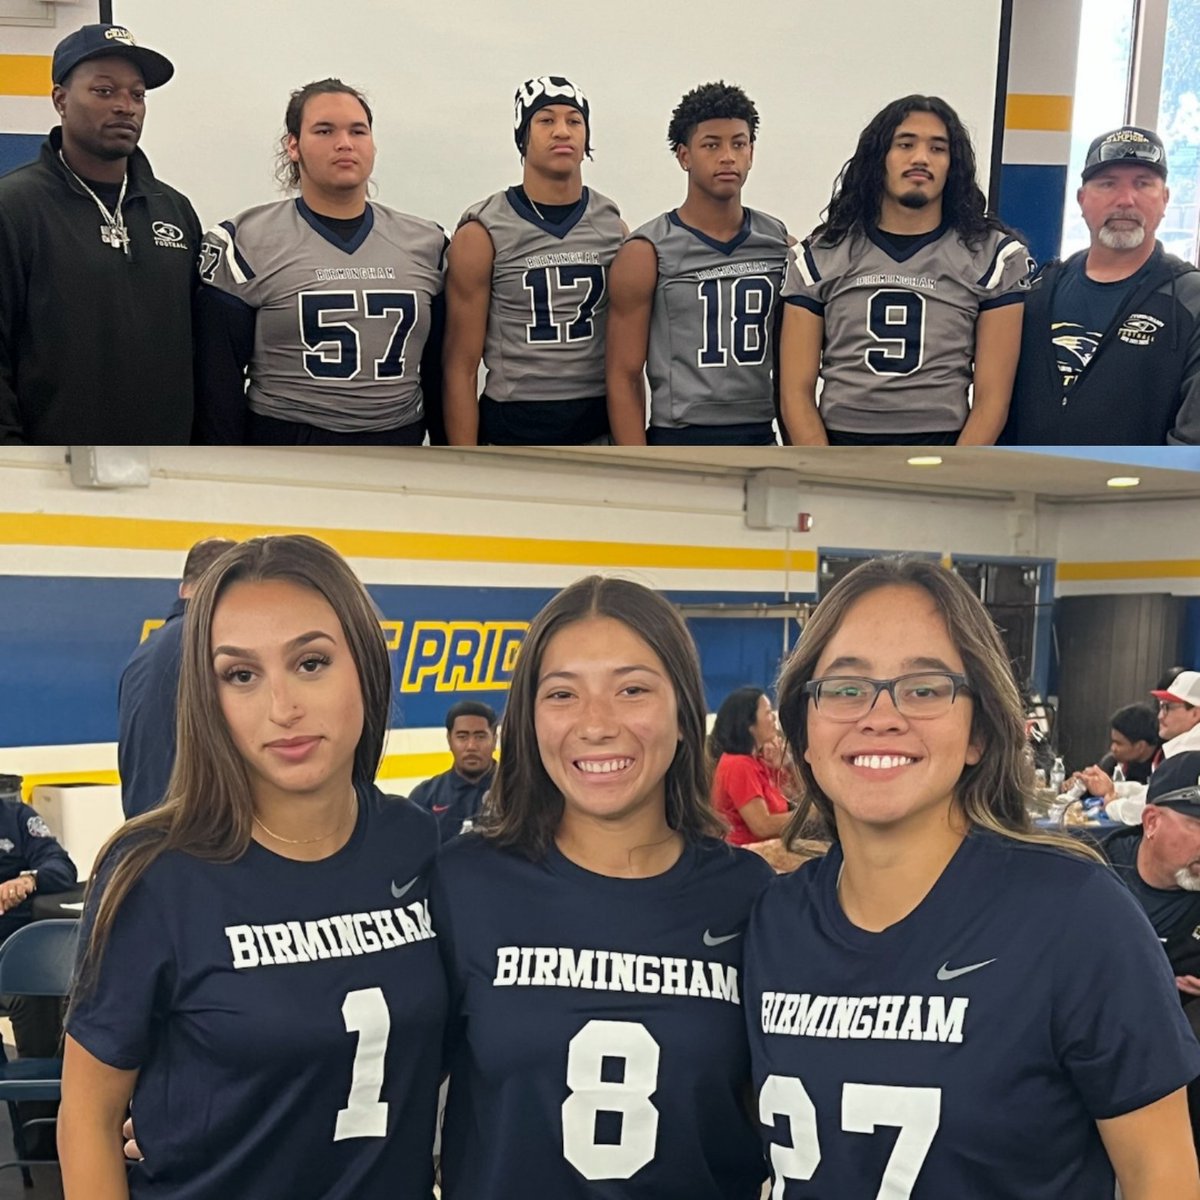 Birmingham football leaders from Flag Football Championship Team and Boys Open Division Finalists representing @BCCHSAthletics @bcchspatriots @CIFLACS Breakfast of Champions event.